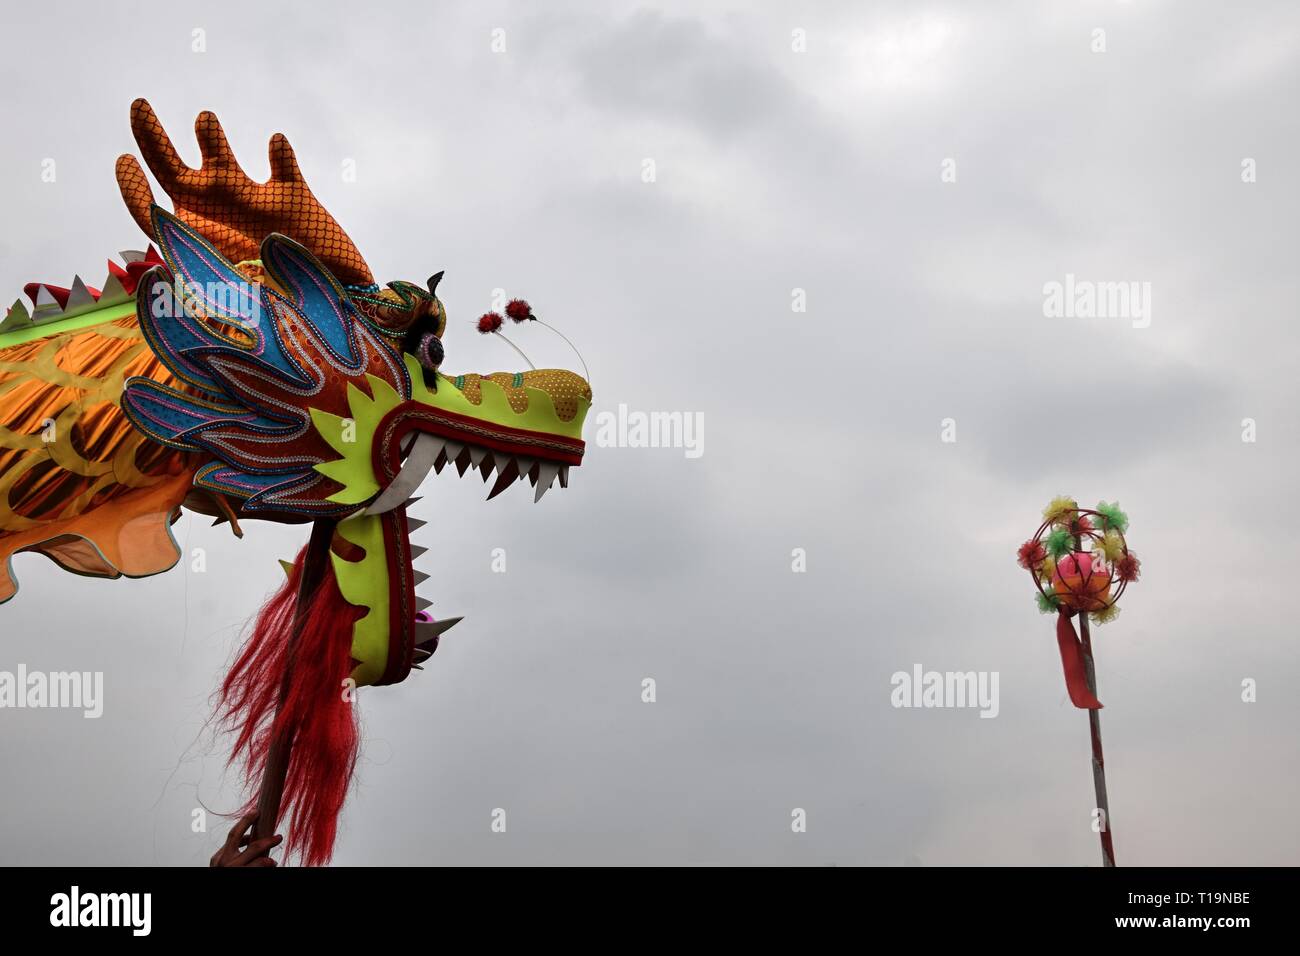 Dragon dance is a form of traditional dance in Chinese culture. It symbolizes the imagined movements of the river spirit in a sinuous manner. Stock Photo